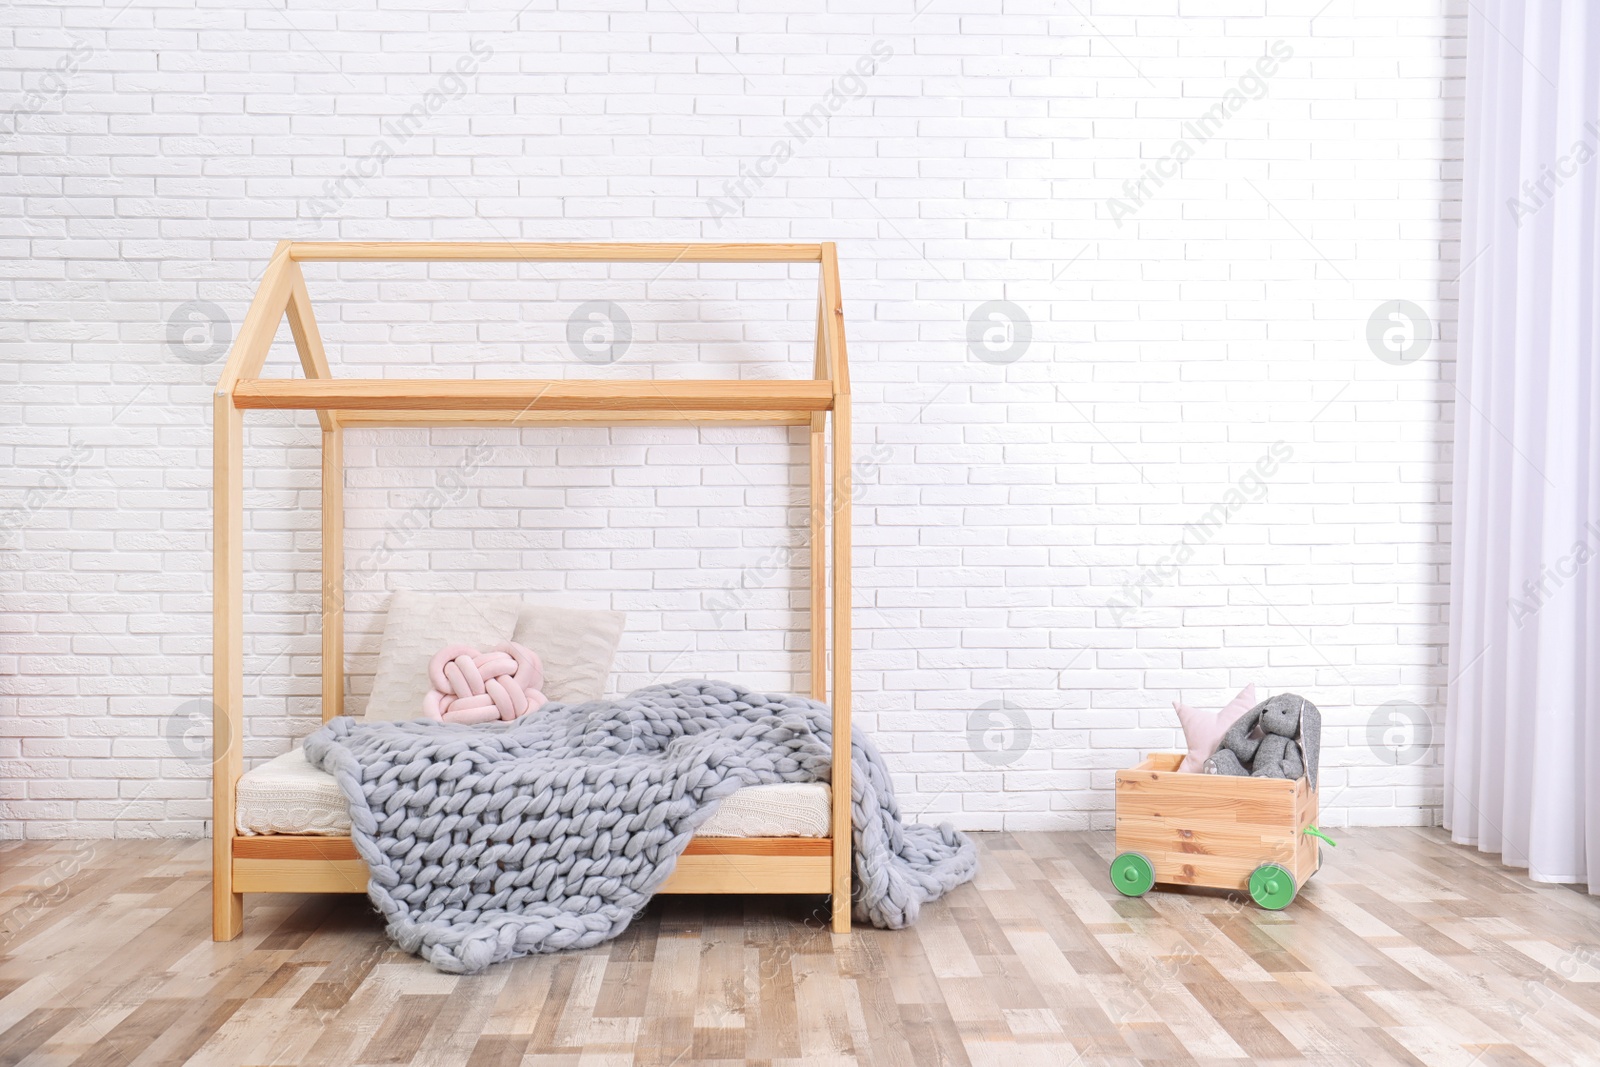 Photo of Stylish child room interior with house bed. Space for text